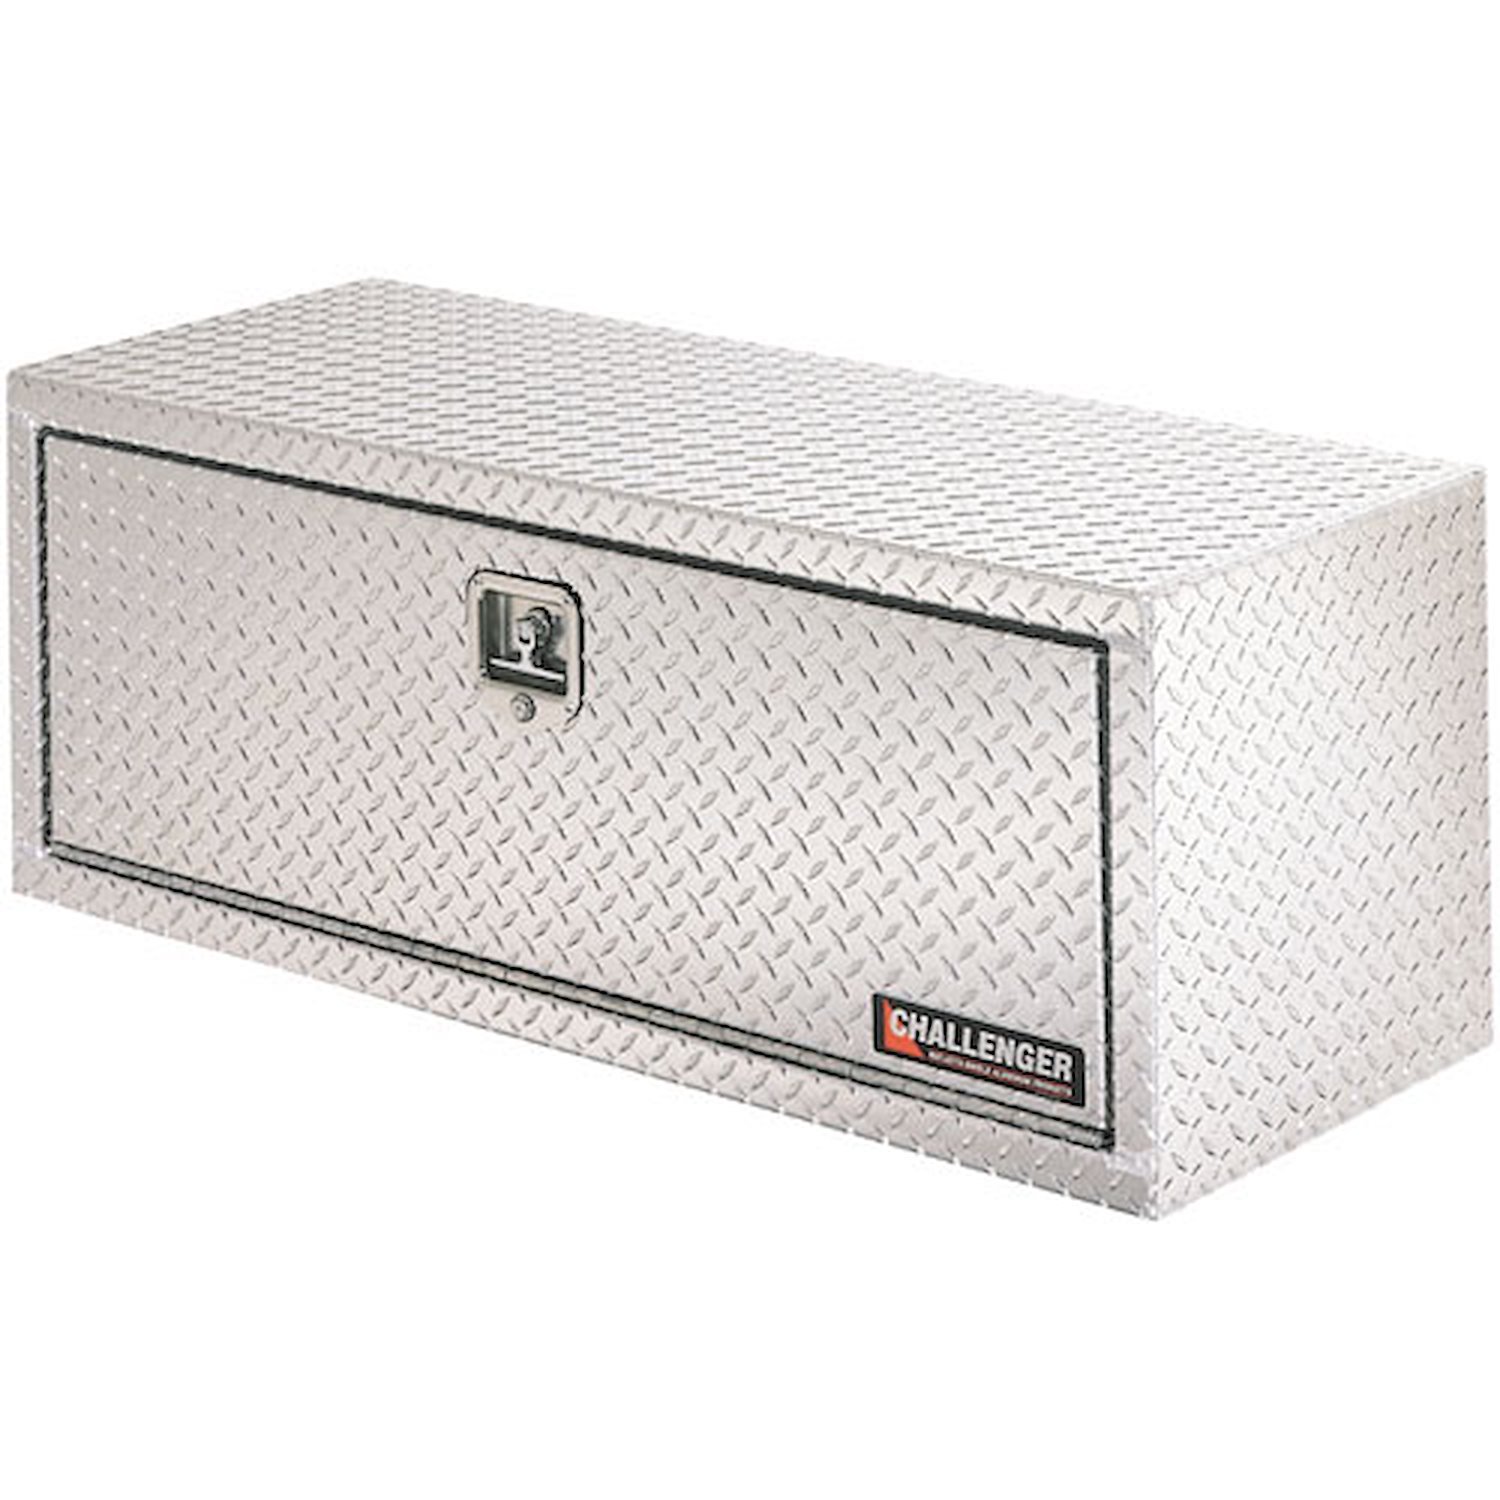 UnderBed Challenger Tool Box Length: 36